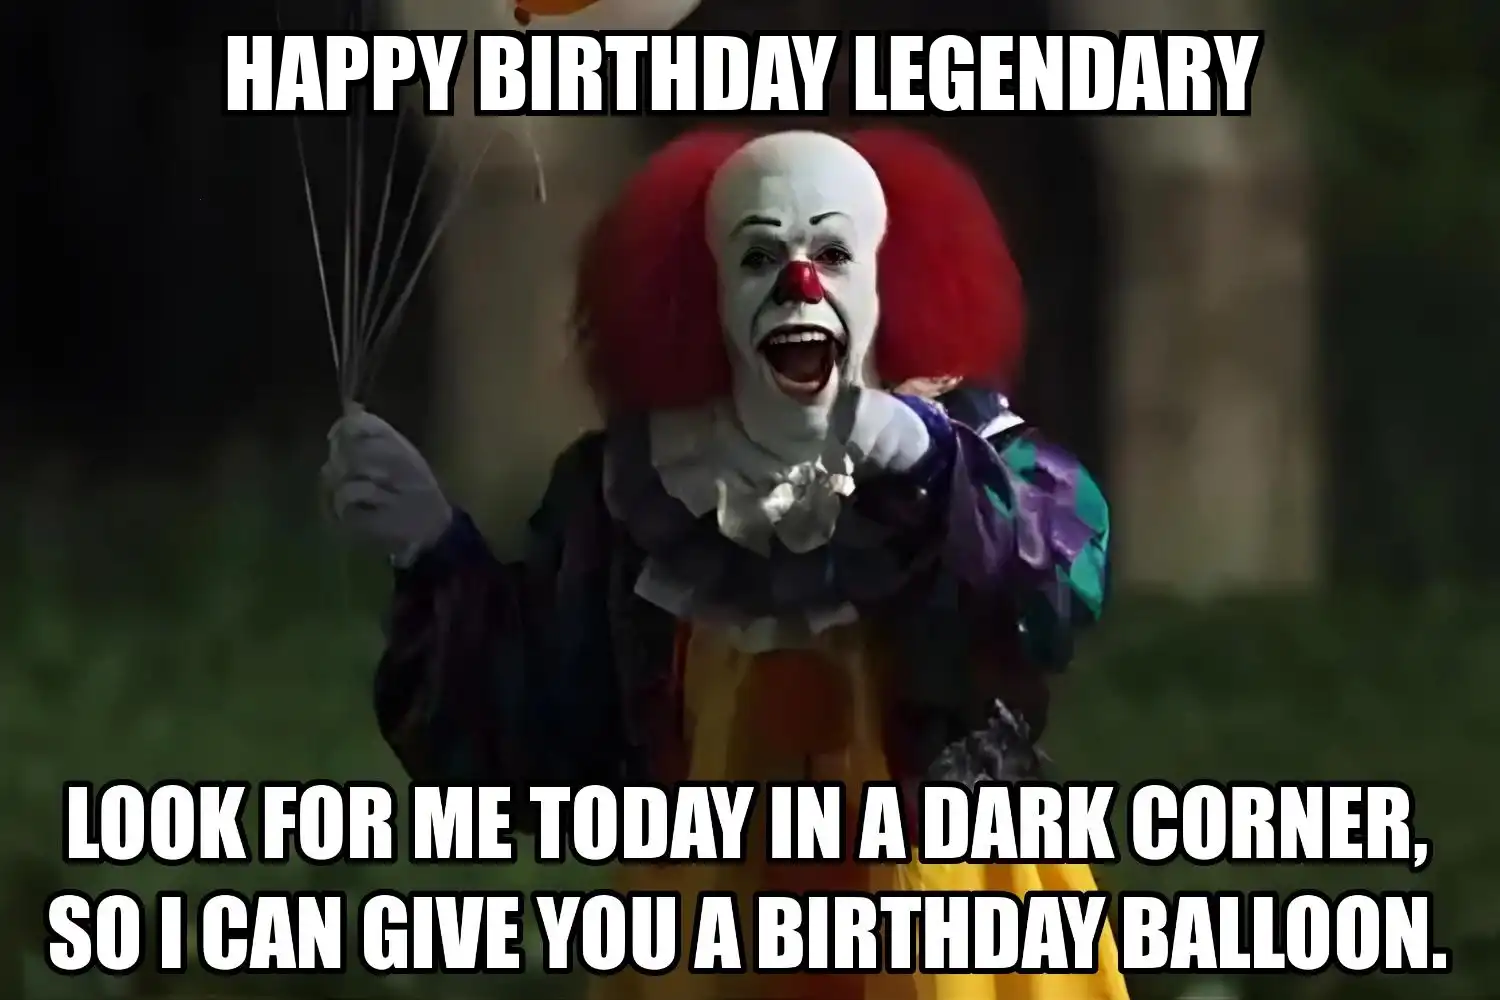 Happy Birthday Legendary I Can Give You A Balloon Meme